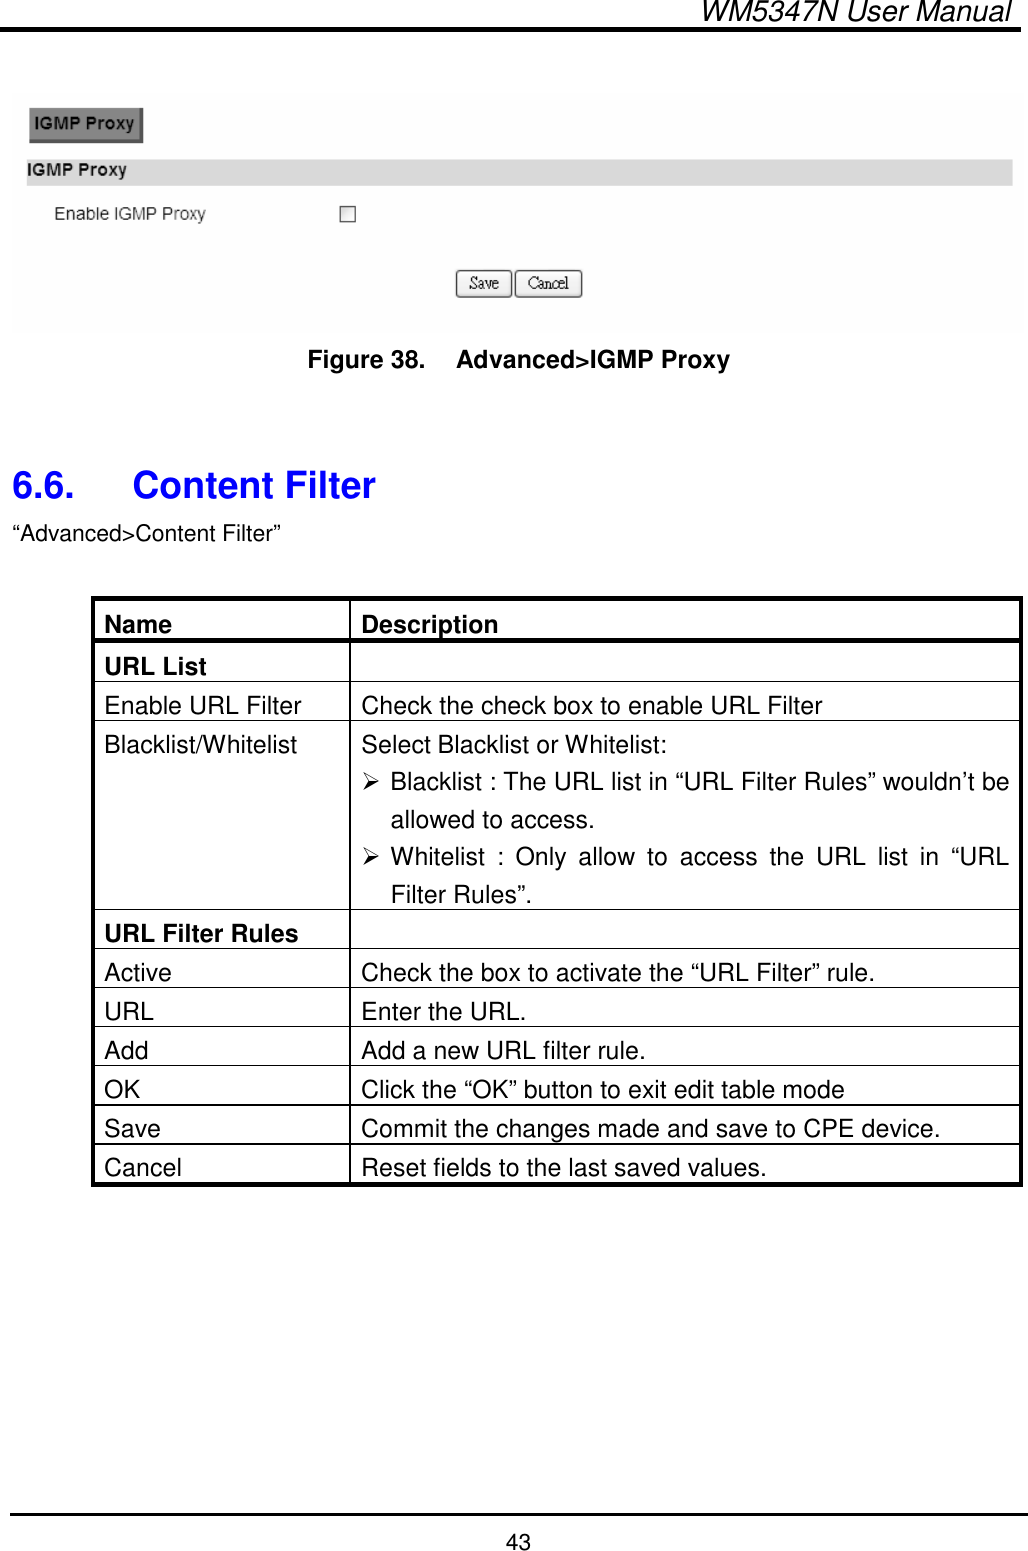  WM5347N User Manual  43   Figure 38.   Advanced&gt;IGMP Proxy   6.6.  Content Filter “Advanced&gt;Content Filter”  Name  Description URL List   Enable URL Filter  Check the check box to enable URL Filter Blacklist/Whitelist  Select Blacklist or Whitelist:  Blacklist : The URL list in “URL Filter Rules” wouldn’t be allowed to access.  Whitelist  :  Only  allow  to  access  the  URL  list  in  “URL Filter Rules”.   URL Filter Rules   Active  Check the box to activate the “URL Filter” rule. URL  Enter the URL. Add  Add a new URL filter rule. OK  Click the “OK” button to exit edit table mode Save  Commit the changes made and save to CPE device. Cancel  Reset fields to the last saved values.  